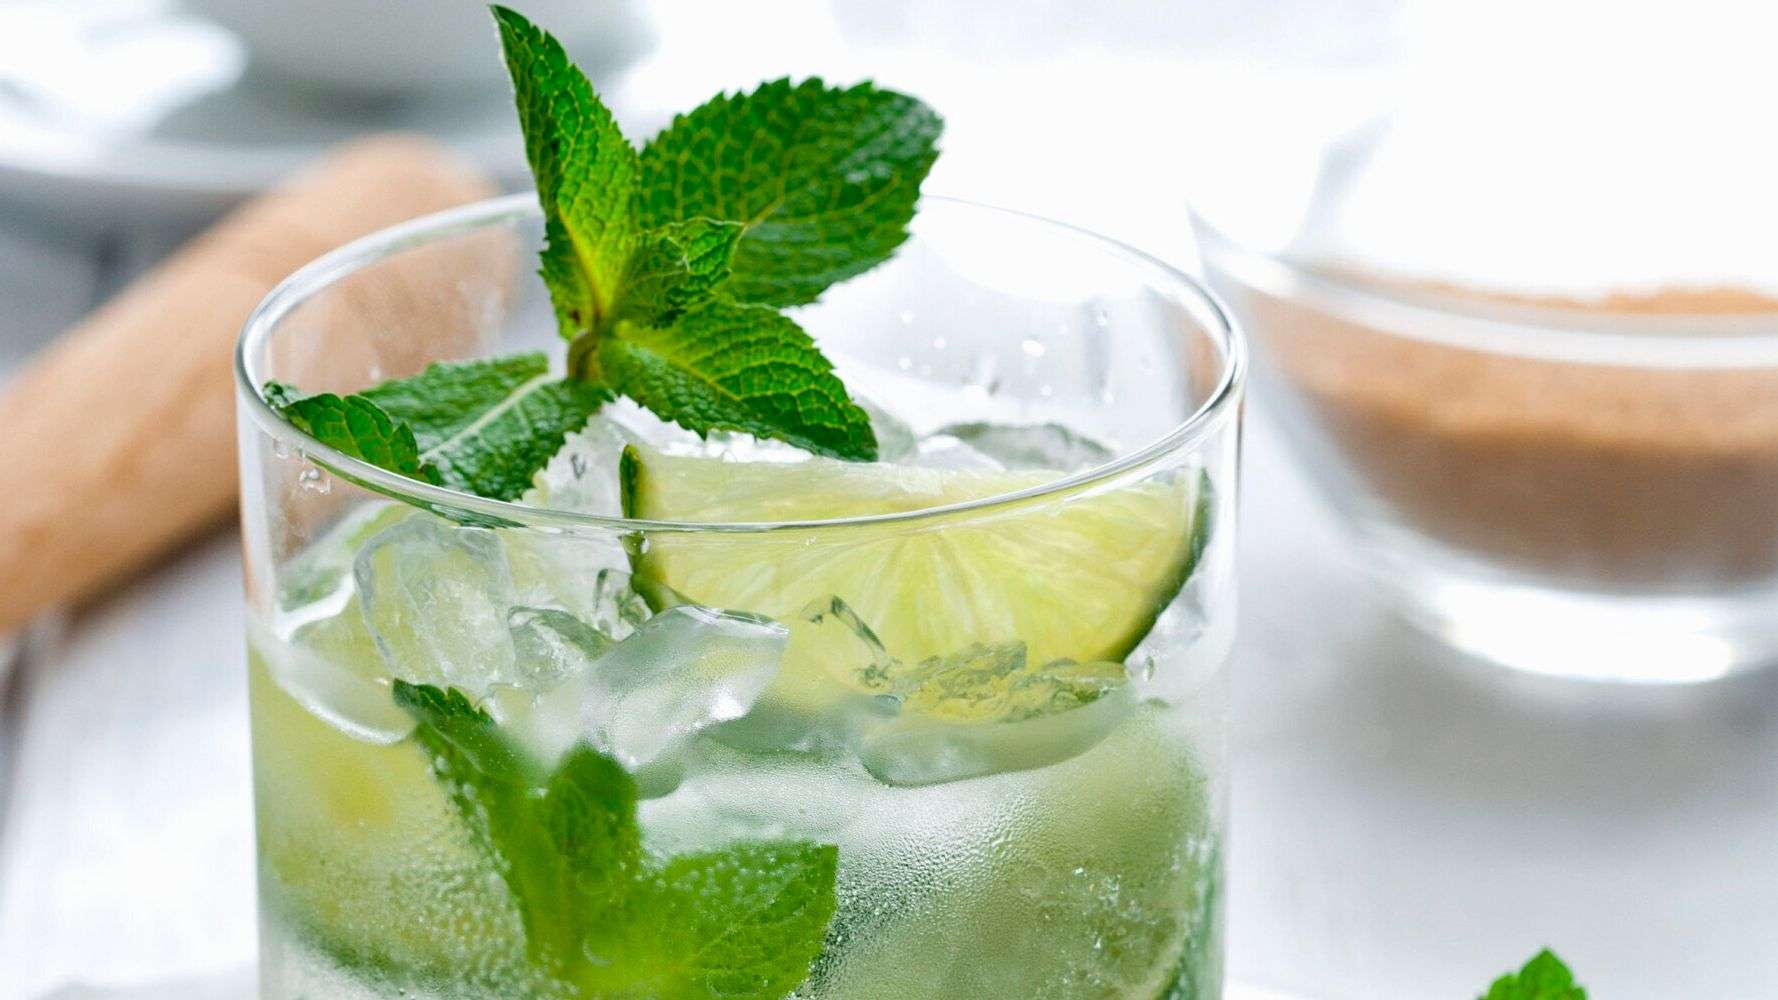 Sip freshness: a detailed recipe for Mojito